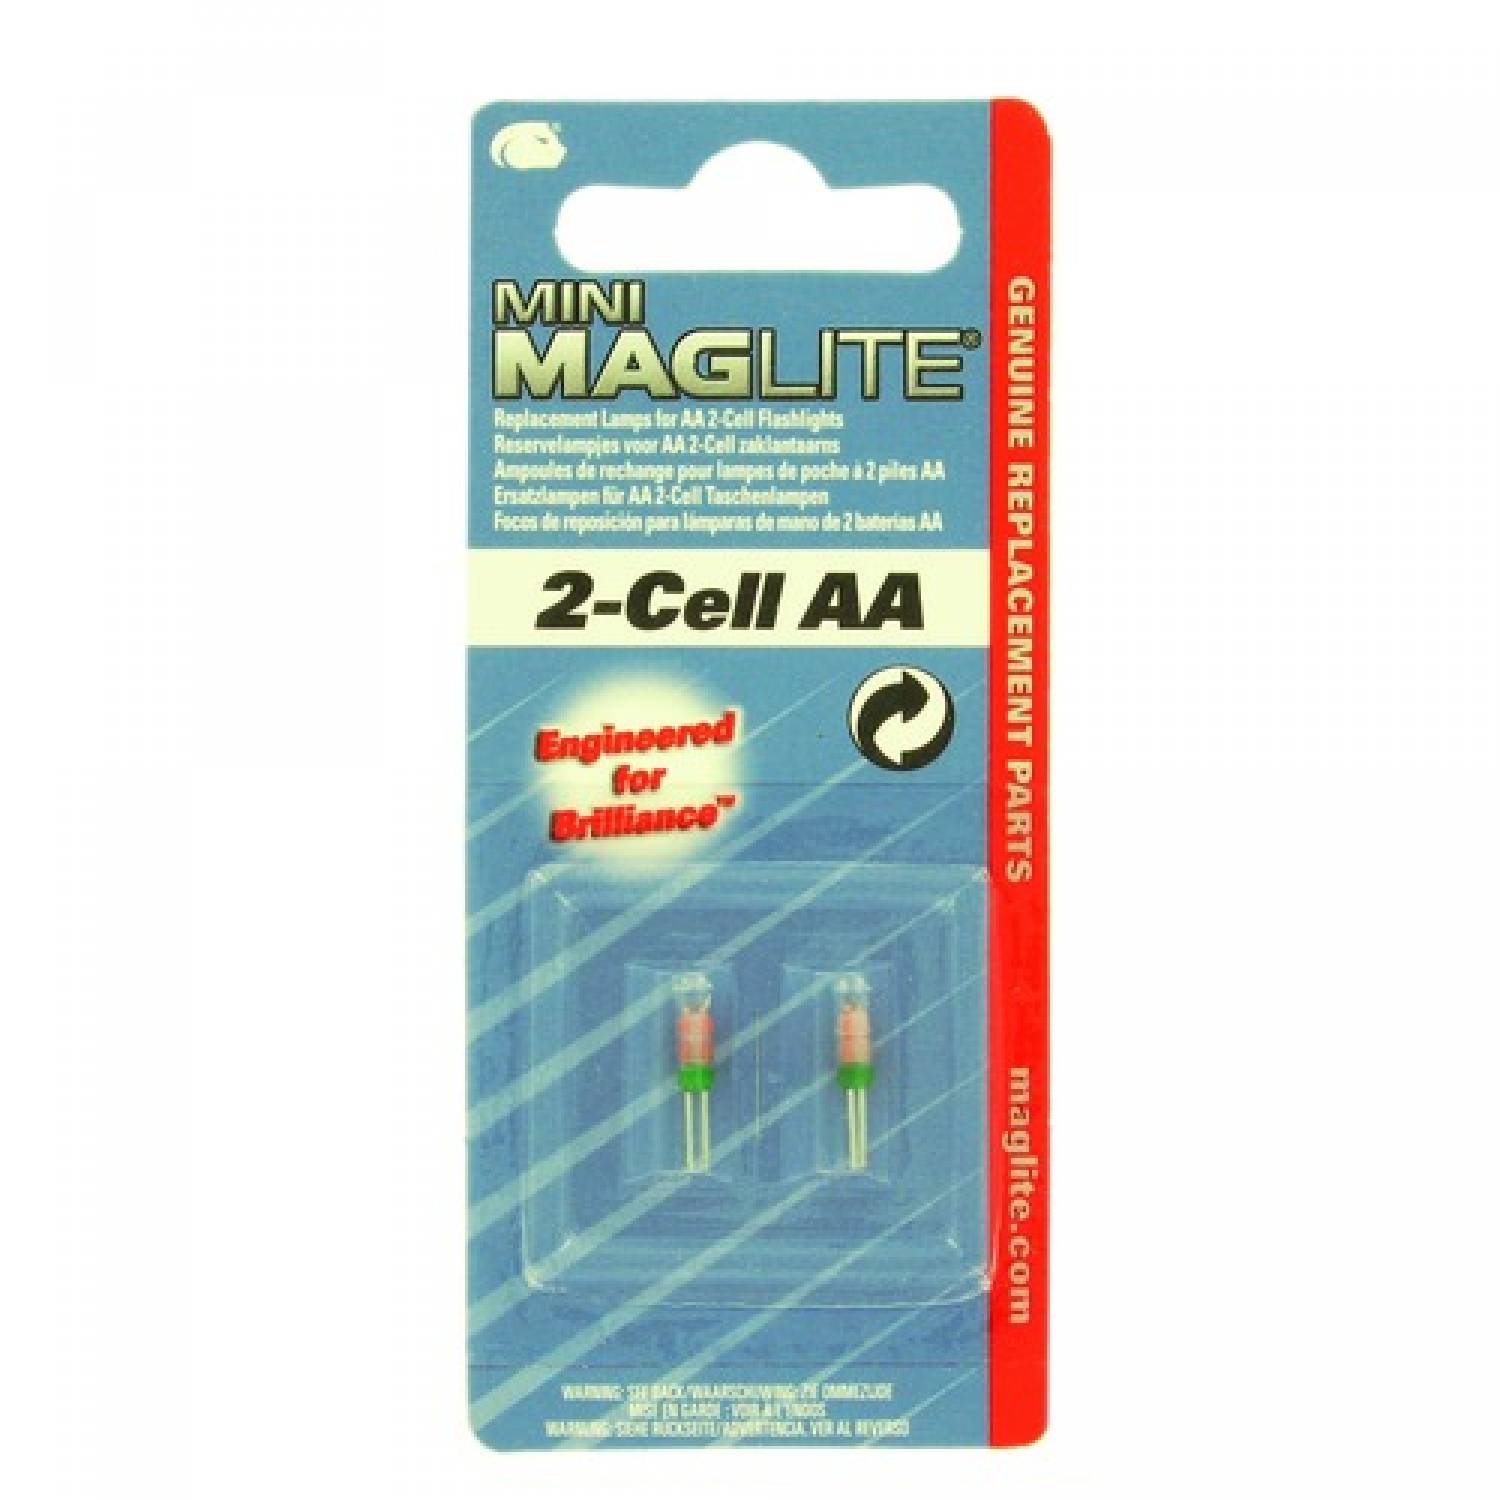 MAGLITE 2-CELL AAA REPLACEMENT BULB